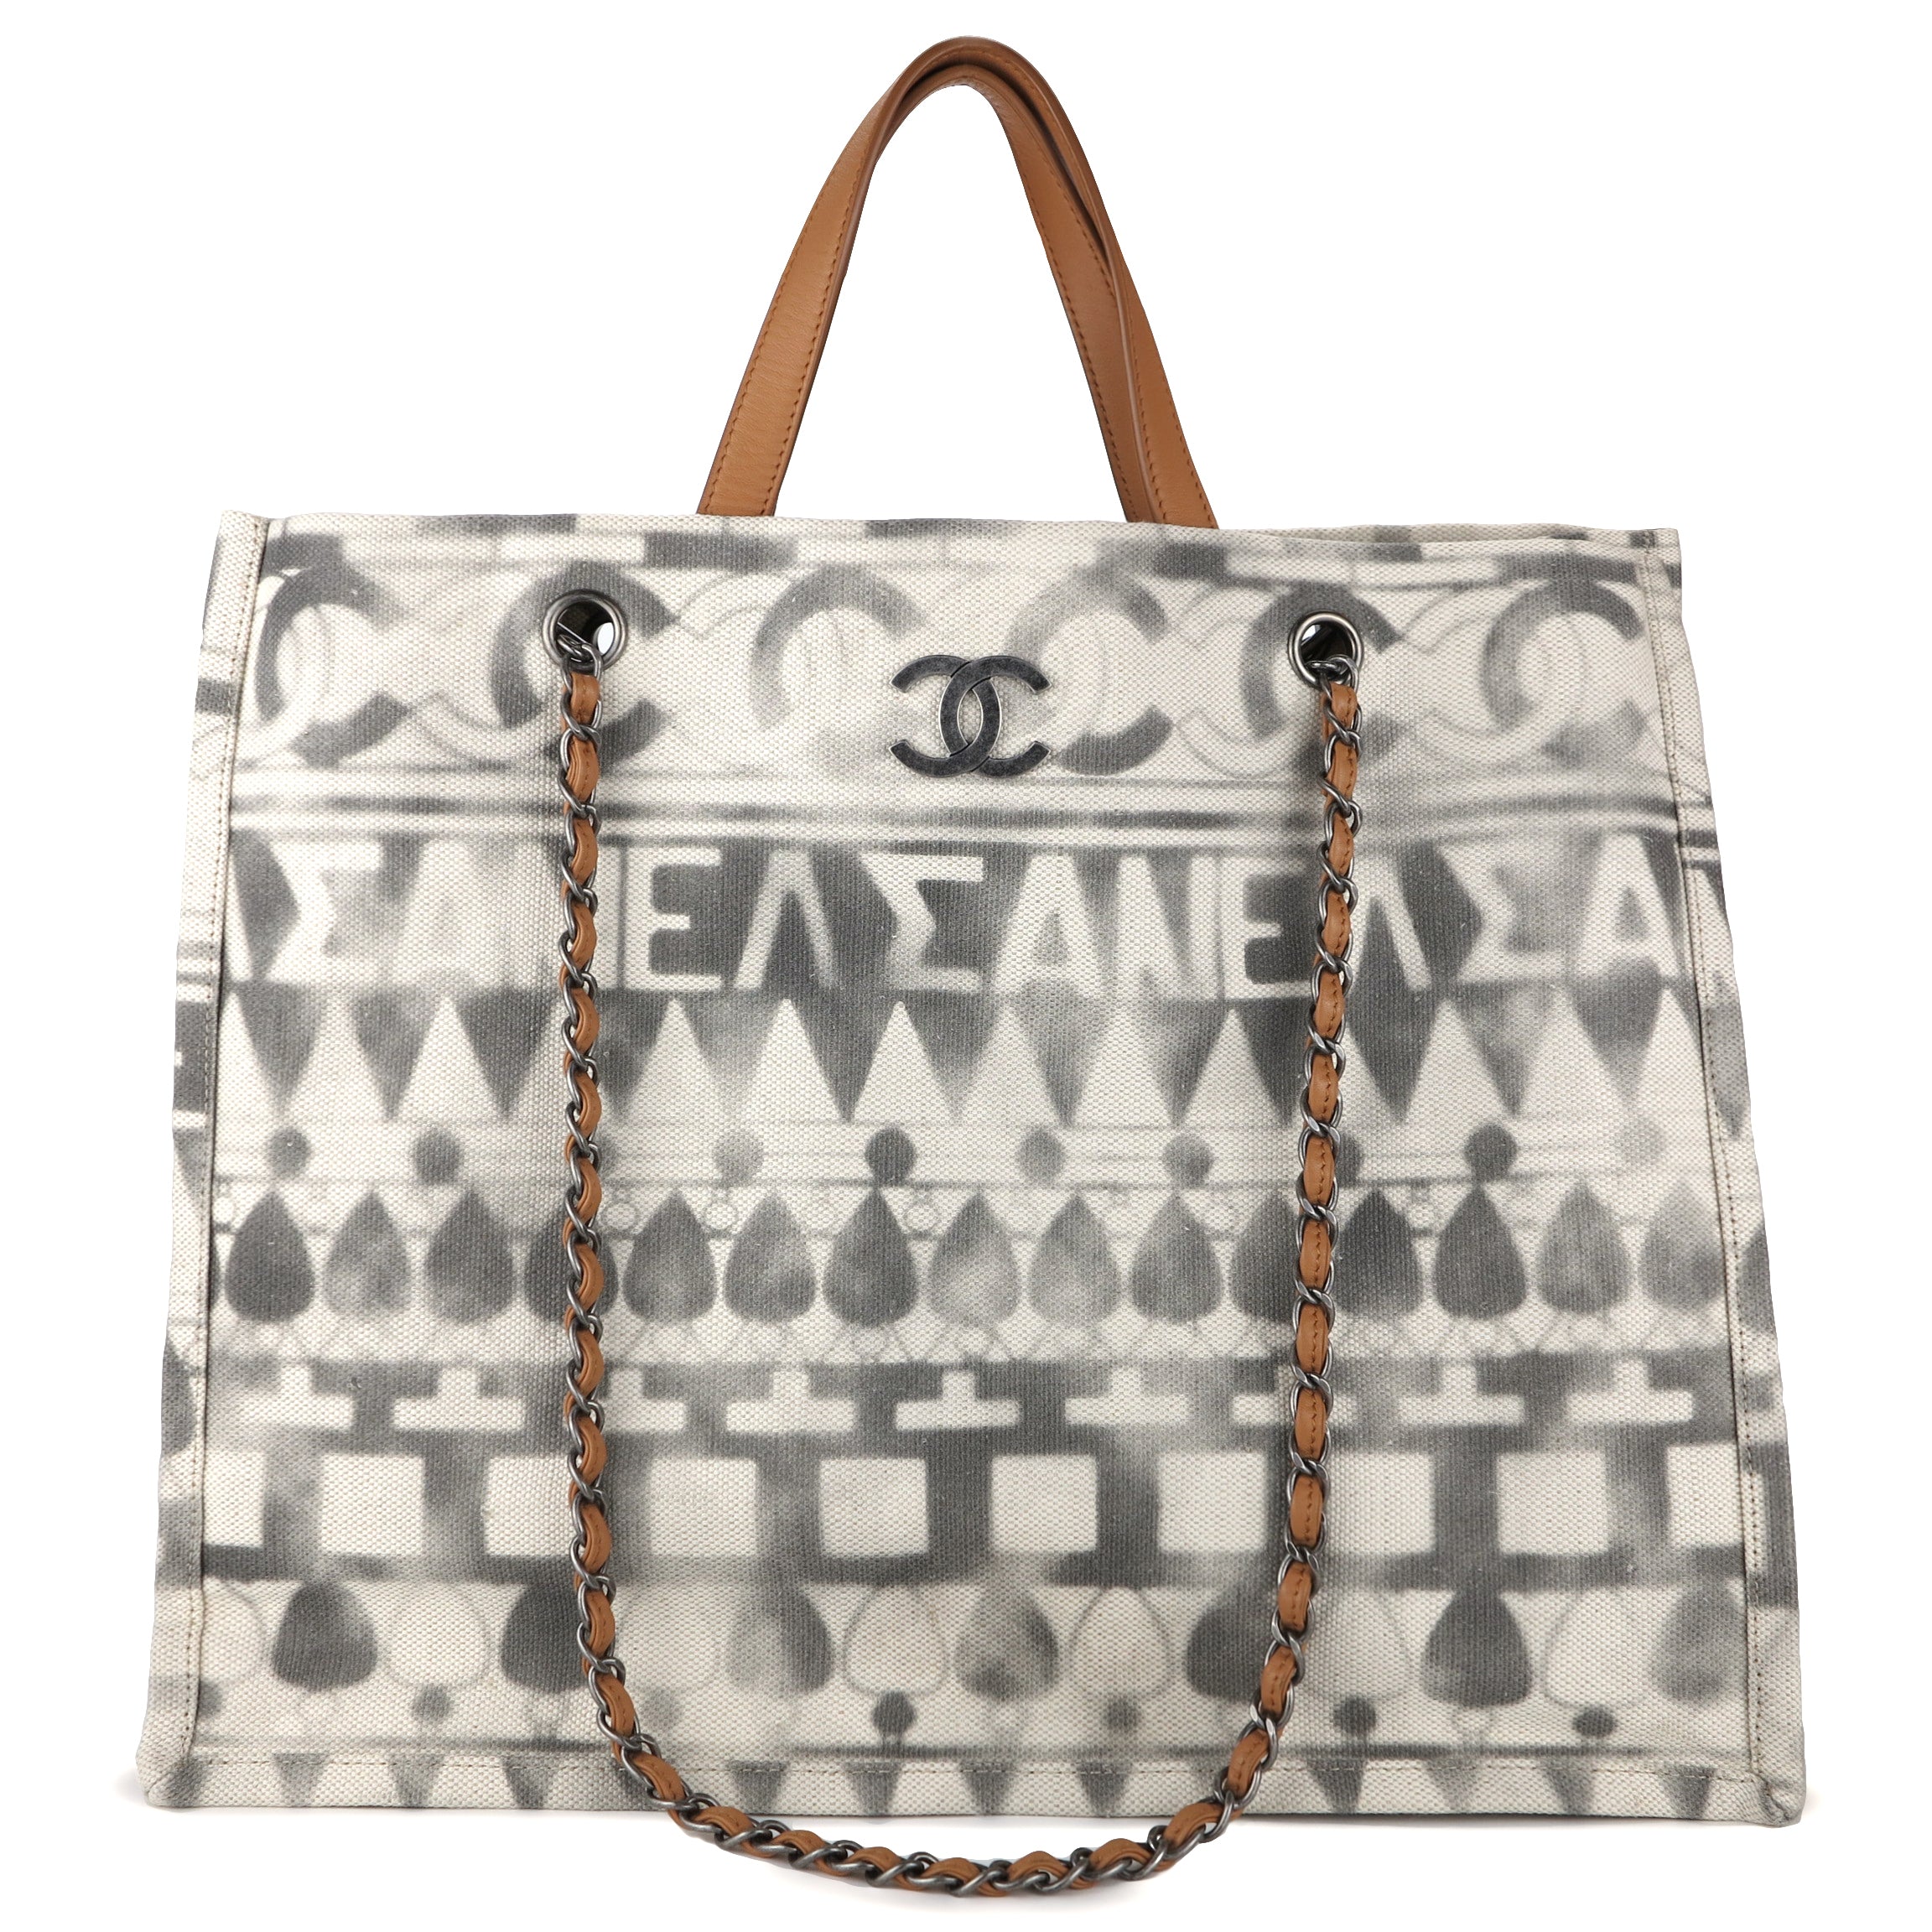 Chanel Beige, Grey And Black Calfskin And Canvas Deauville